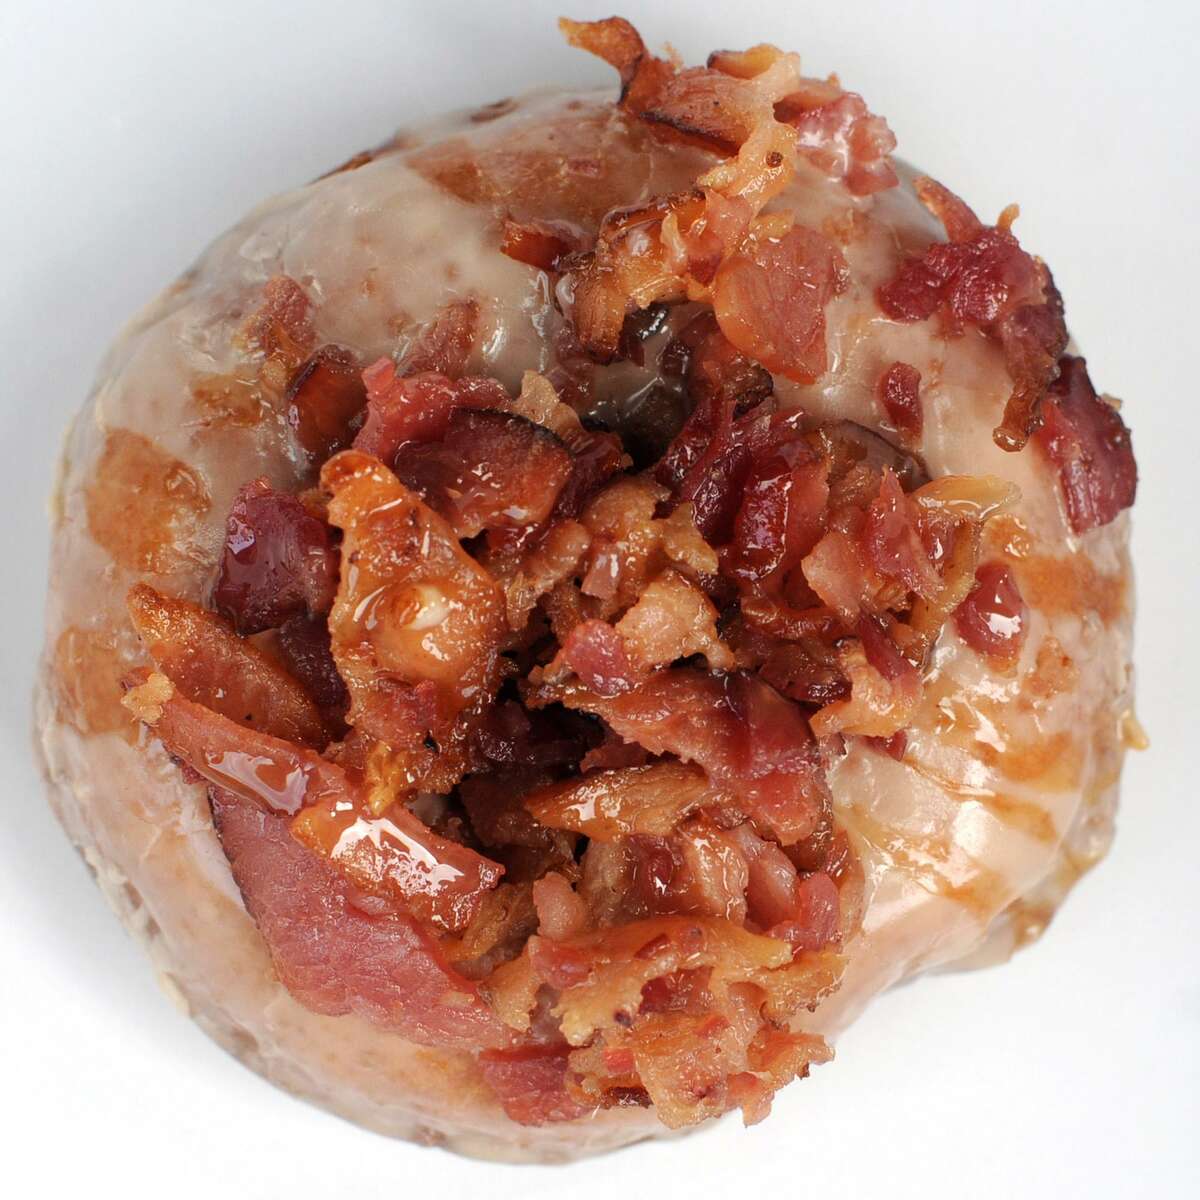 Bacon in the Sun Where to find it: Duck Donuts, 11703 Huebner Road, Suite 113, 210-476-5500, duckdonuts.com, Facebook: Duck Donuts (San Antonio, TX)Why we love it: Chopped bacon, salted caramel drizzle, maple icing. Pile that on a piping hot, spot fried cake doughnuts, and you have a treat that smells like the best short-order diner in town.